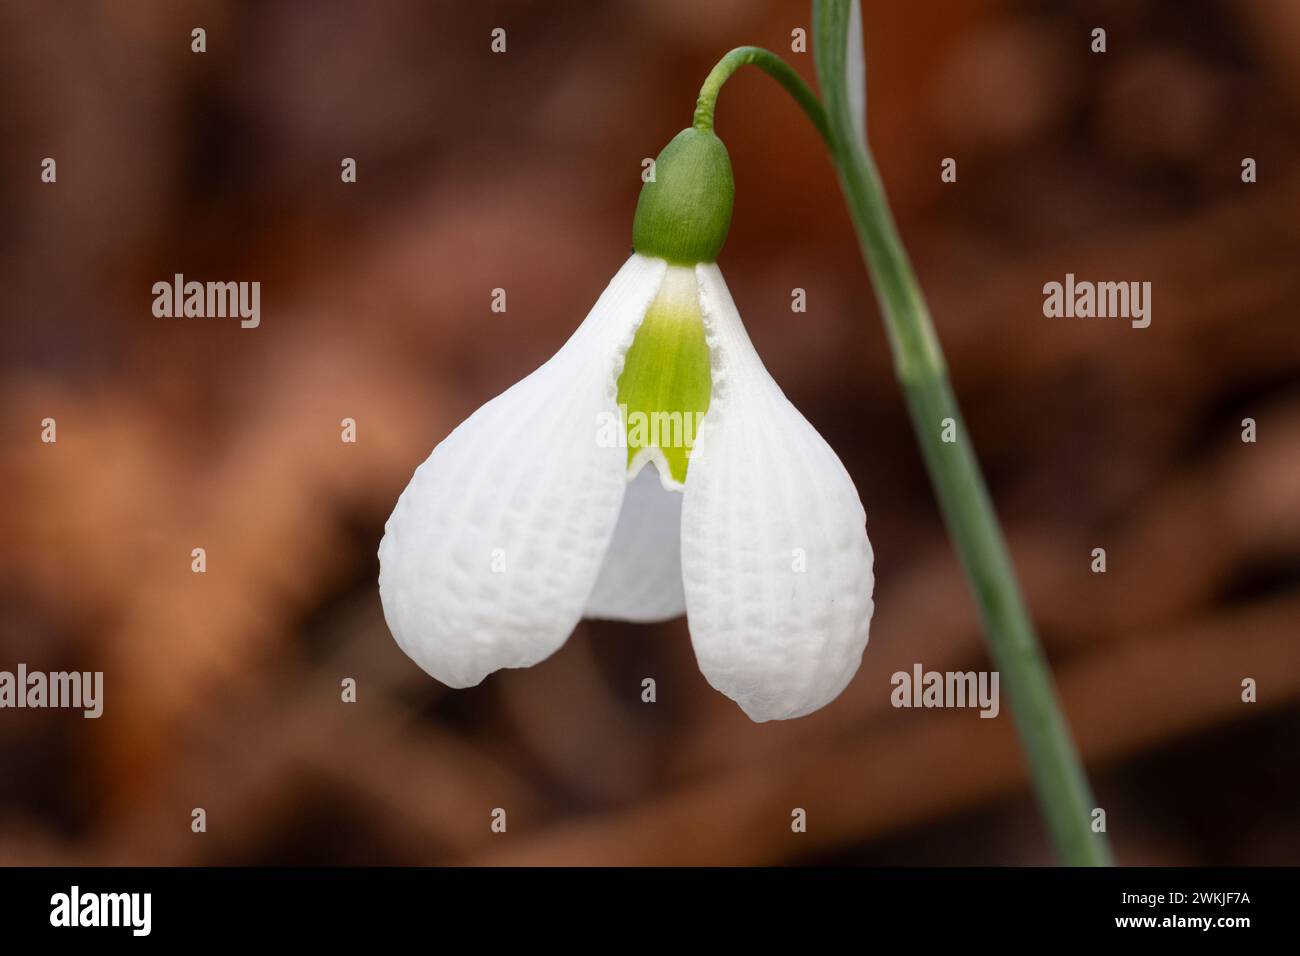 Galanthus plicatus 'Augustus' flower, snowdrop 'Augustus' variety of snowdrops with unusual dimpled petals, flowering during February, England, UK Stock Photo